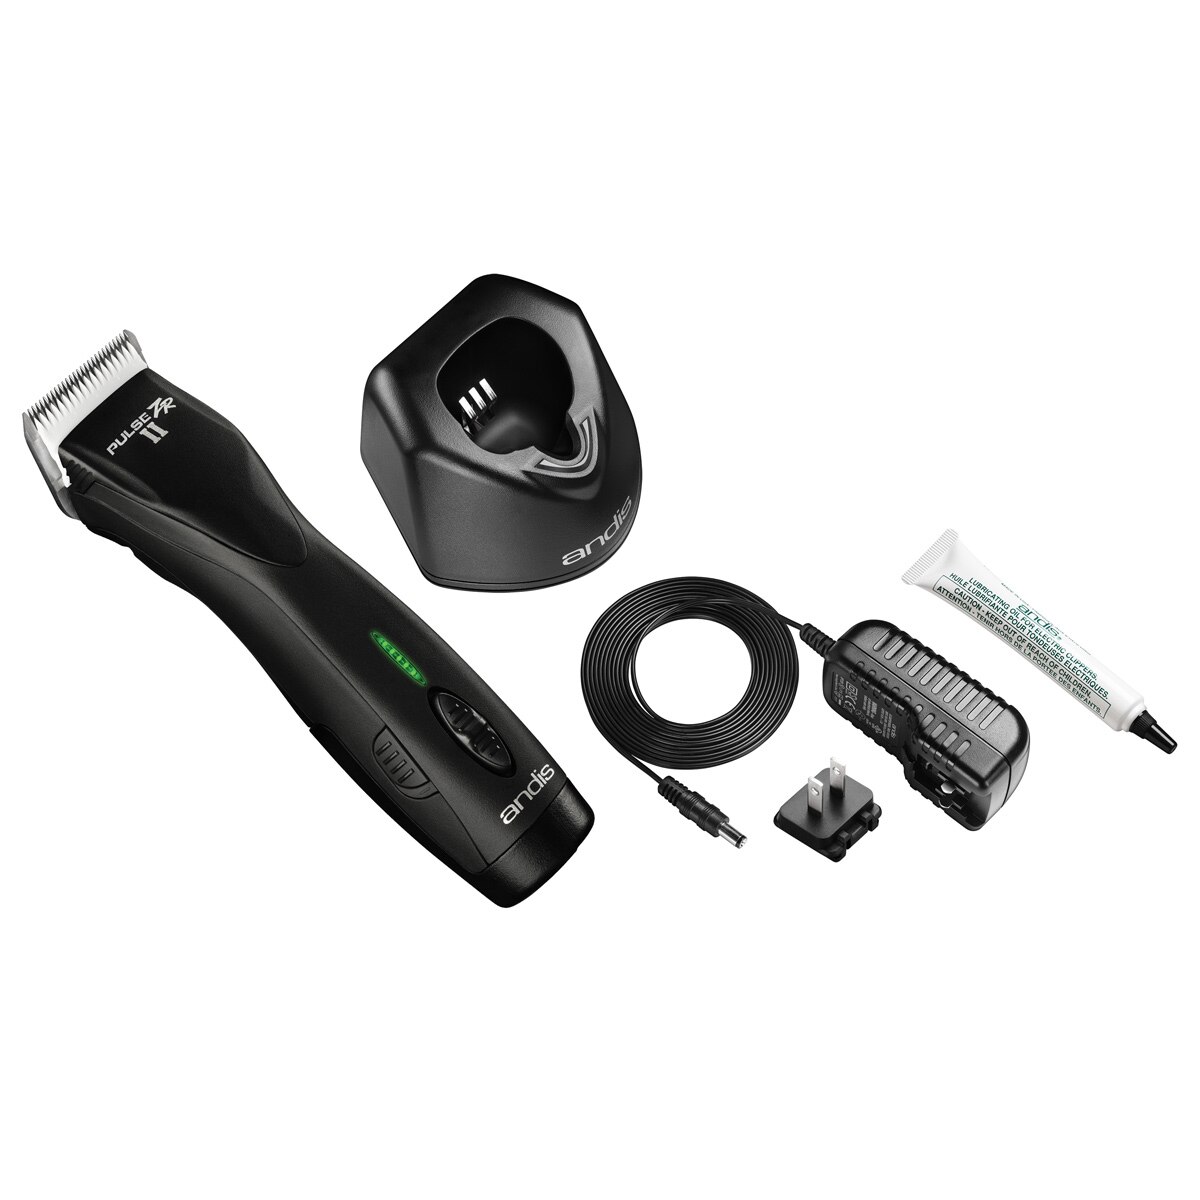 andis clippers andis pulse zr ii cordless clipper